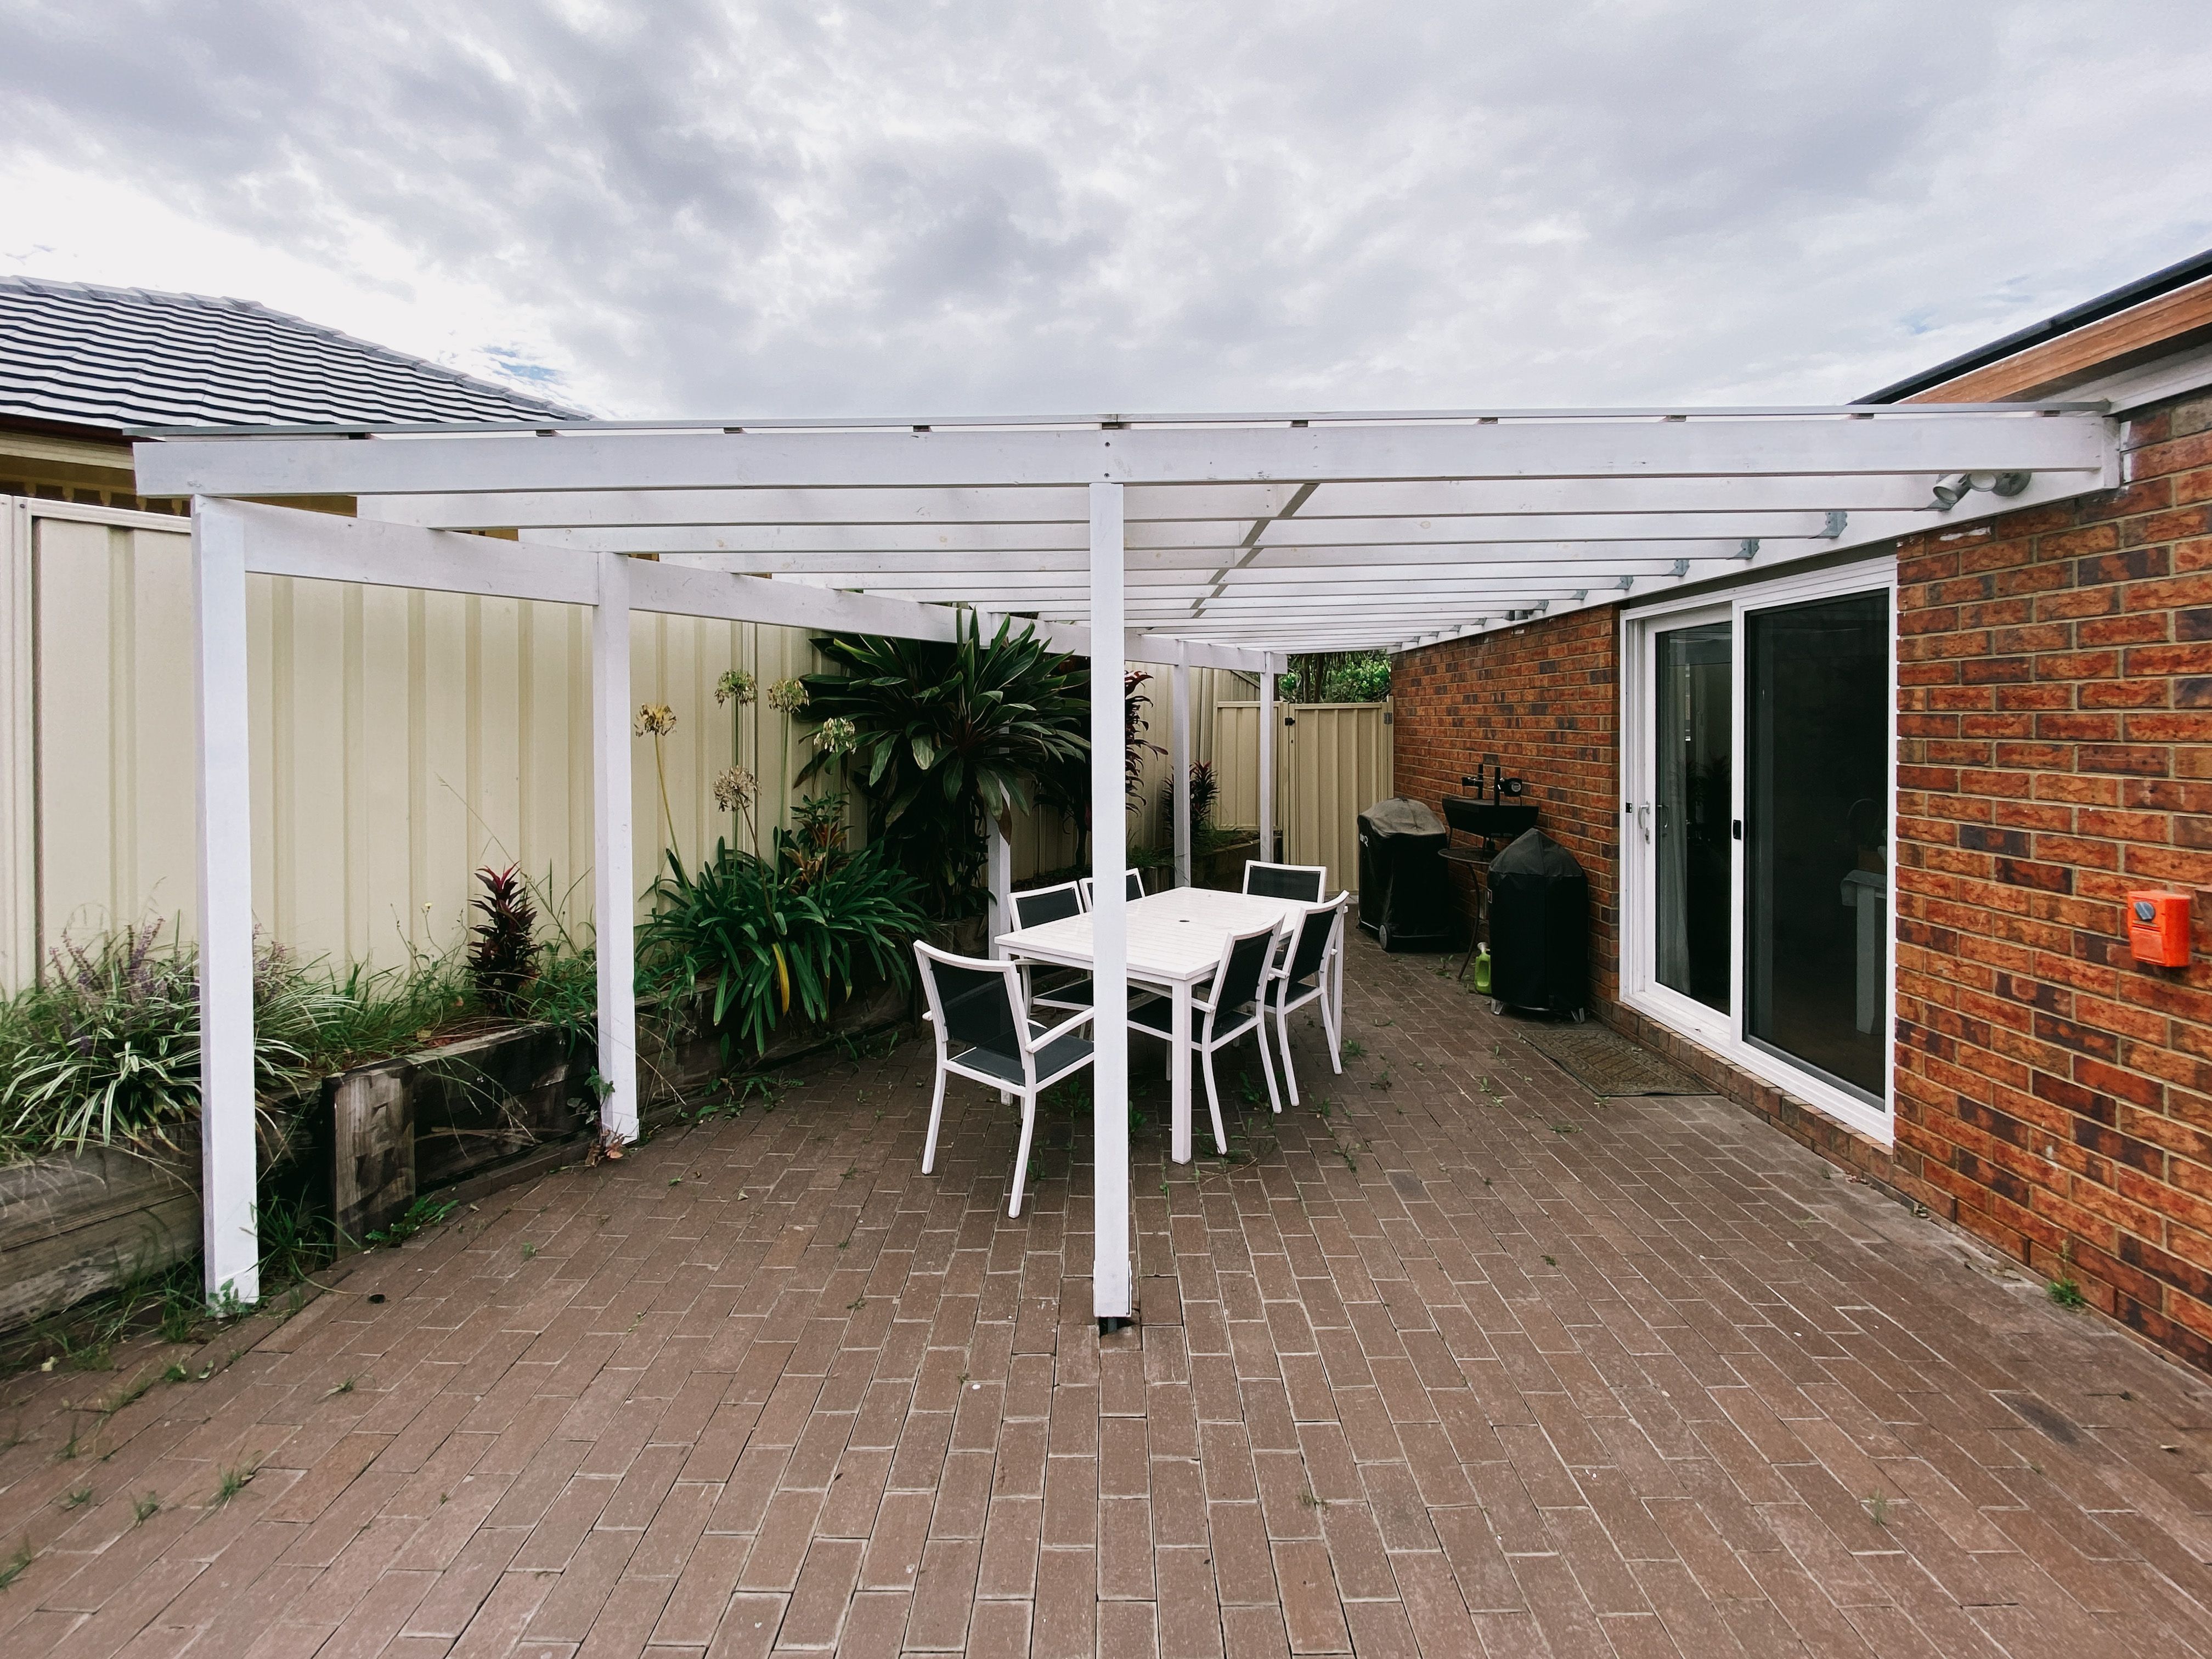 A photo of our old pergola. It's done in timber with white paint over it, and the roofing is polycarbonate. There's a vertical post in the middle of the longest span and the whole thing looks a bit shit.